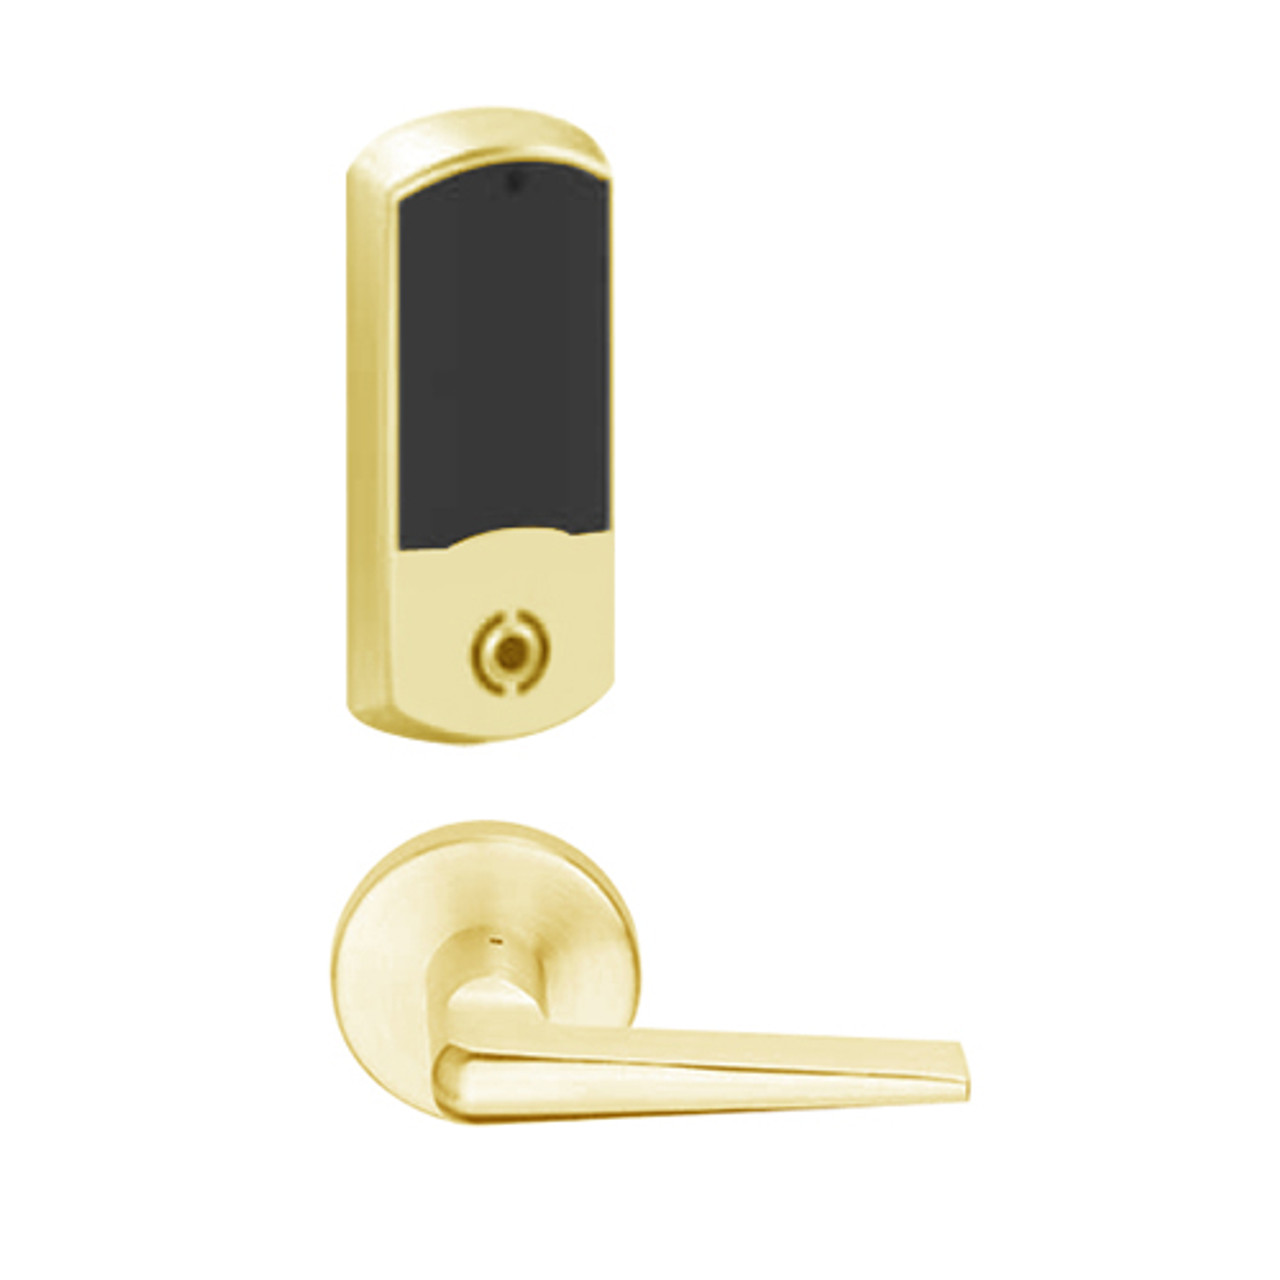 LEMS-GRW-BD-05-605-00B Schlage Storeroom Wireless Greenwich Mortise Lock with LED Indicator and 05 Lever Prepped for SFIC in Bright Brass